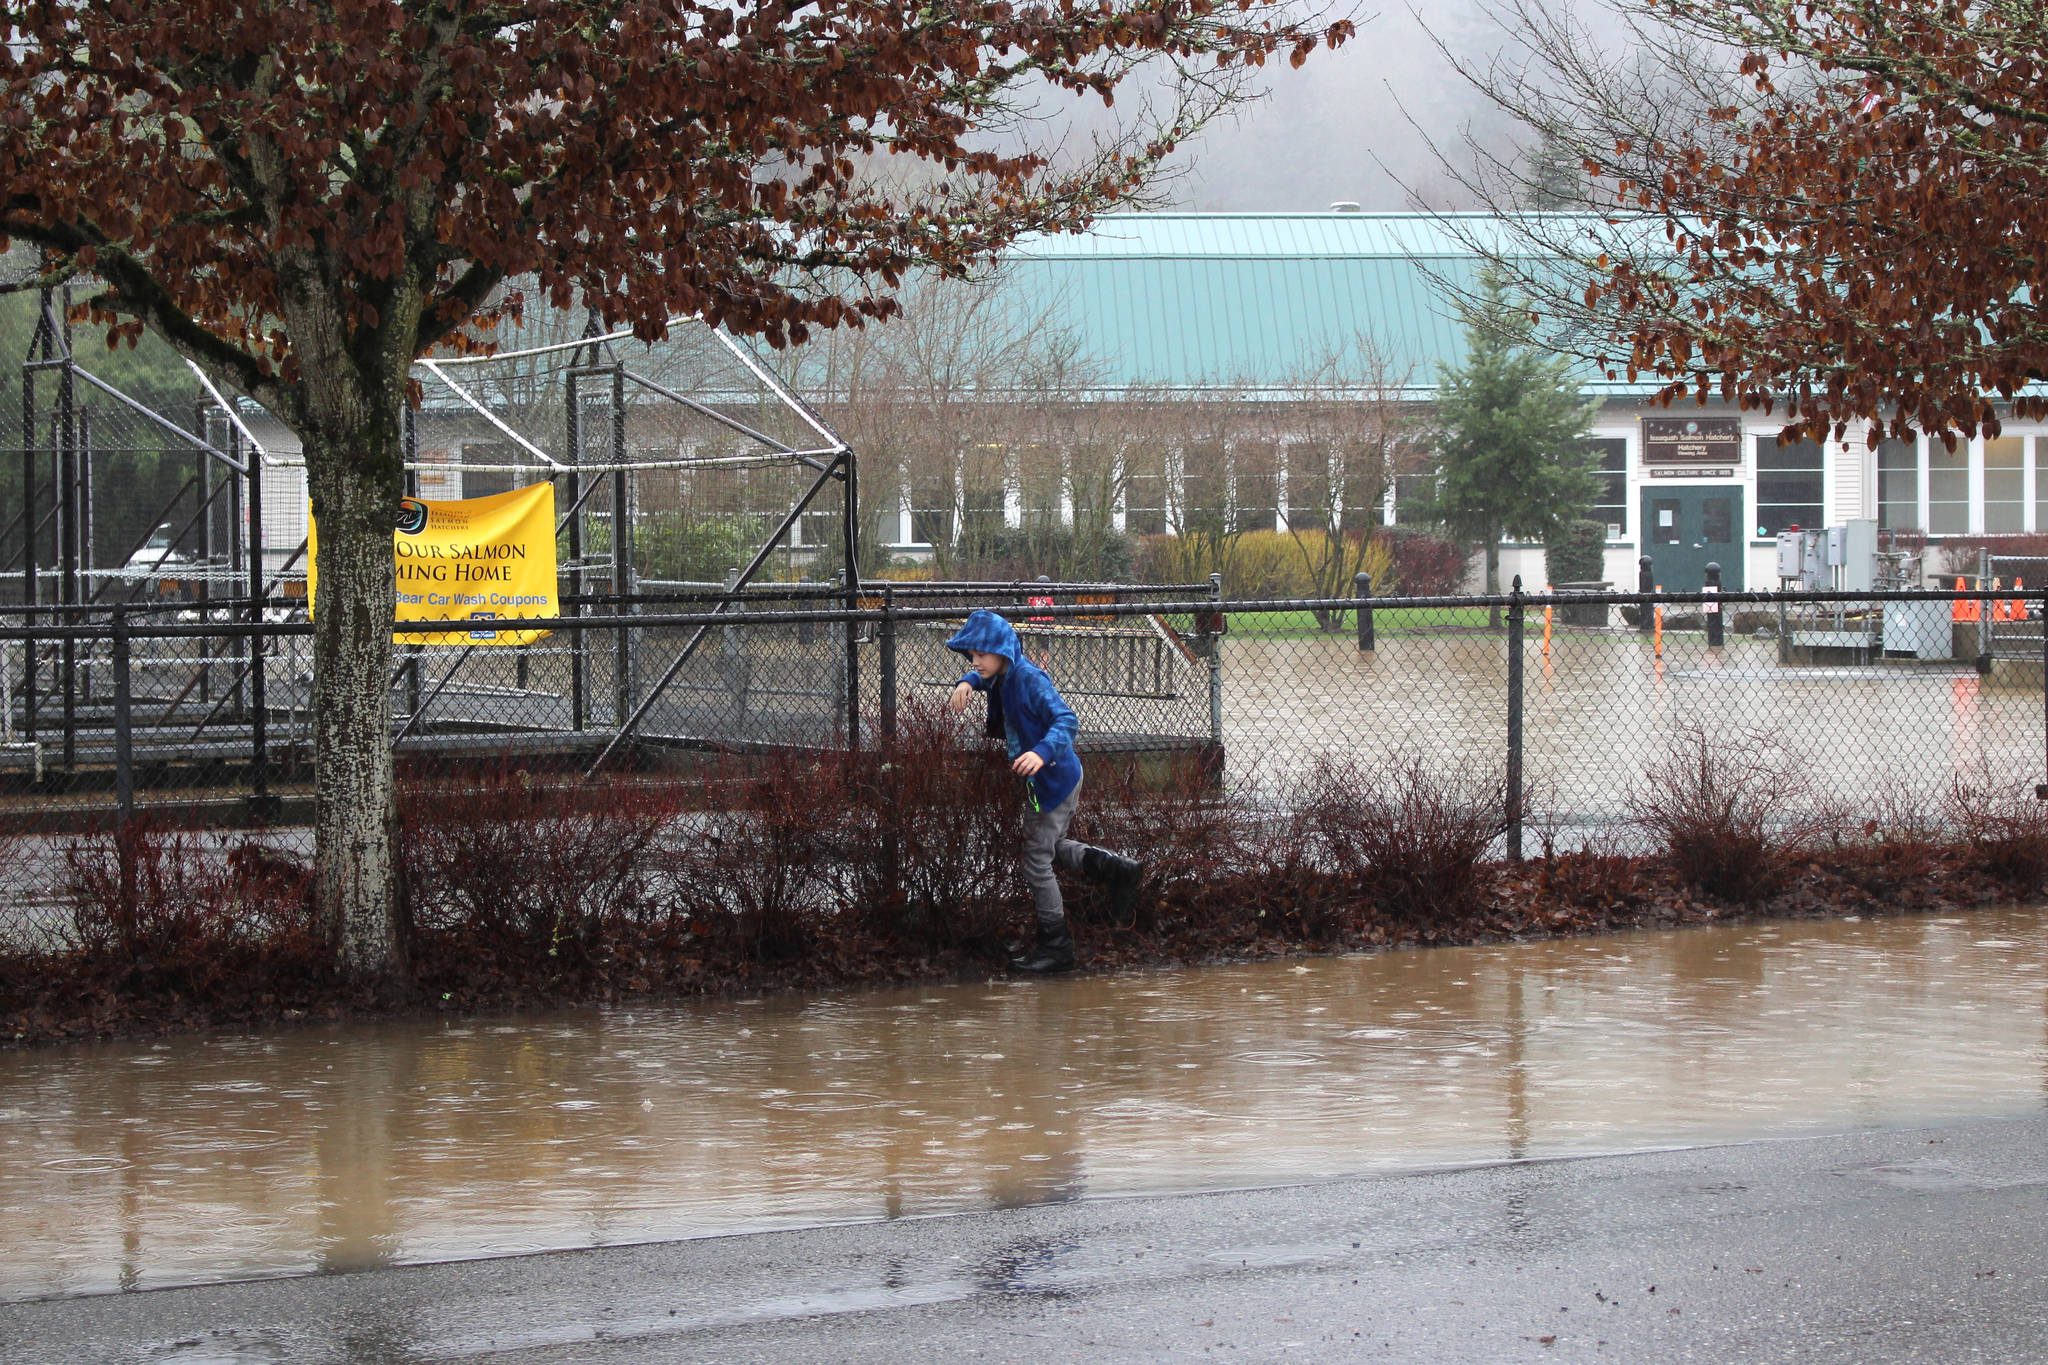 A child jumps in the puddles of the flooding outside the Issaquah Salmon Hatchery in Issaquah, WA, on Feb. 6, 2020. Mitchell Atencio/Staff Photo